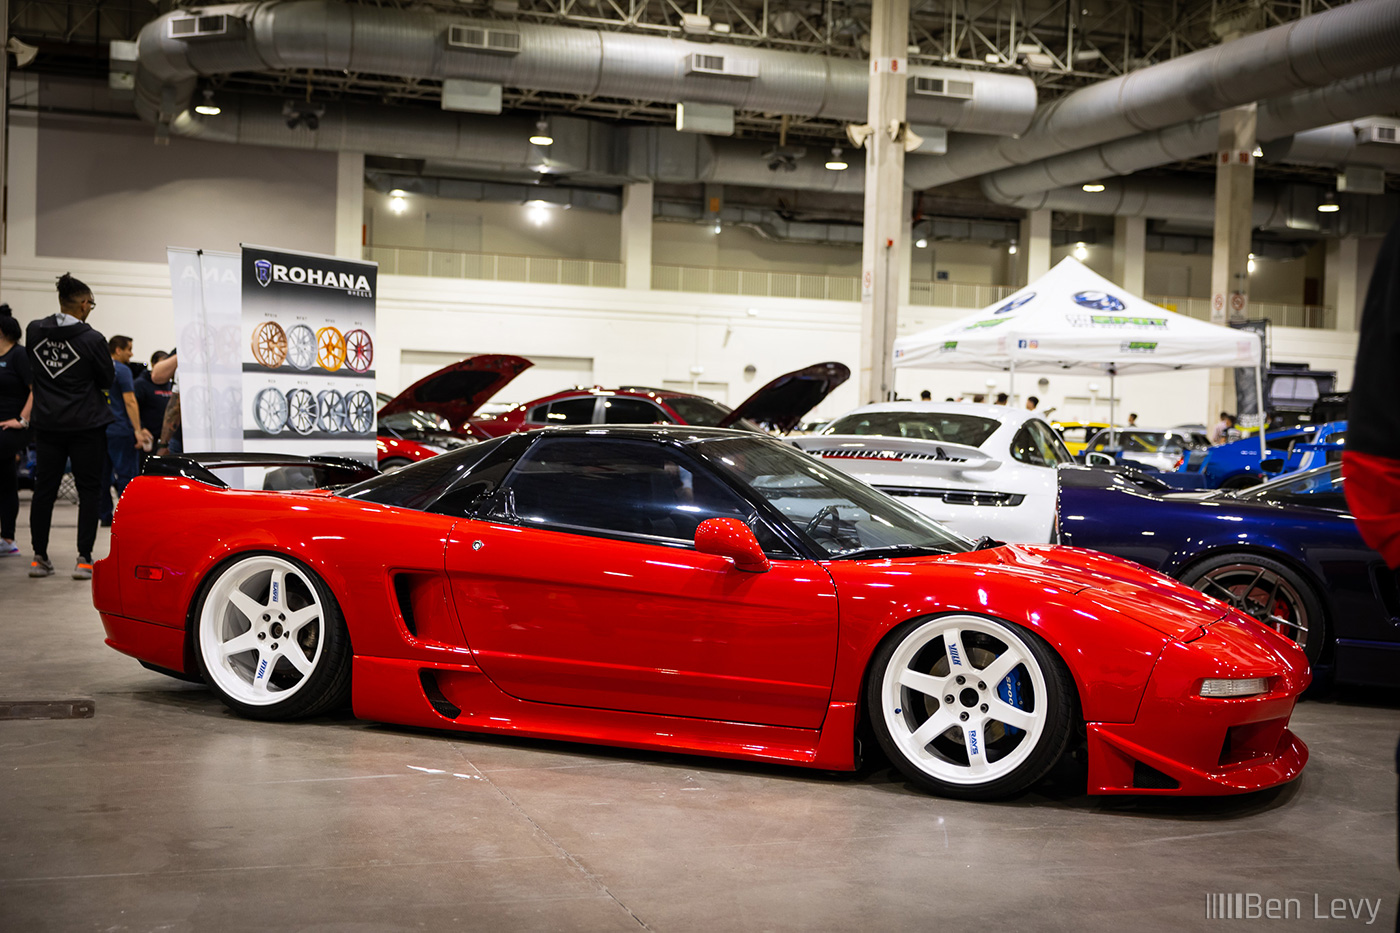 Bagged Red Acura NSX at Wekfest Chicago